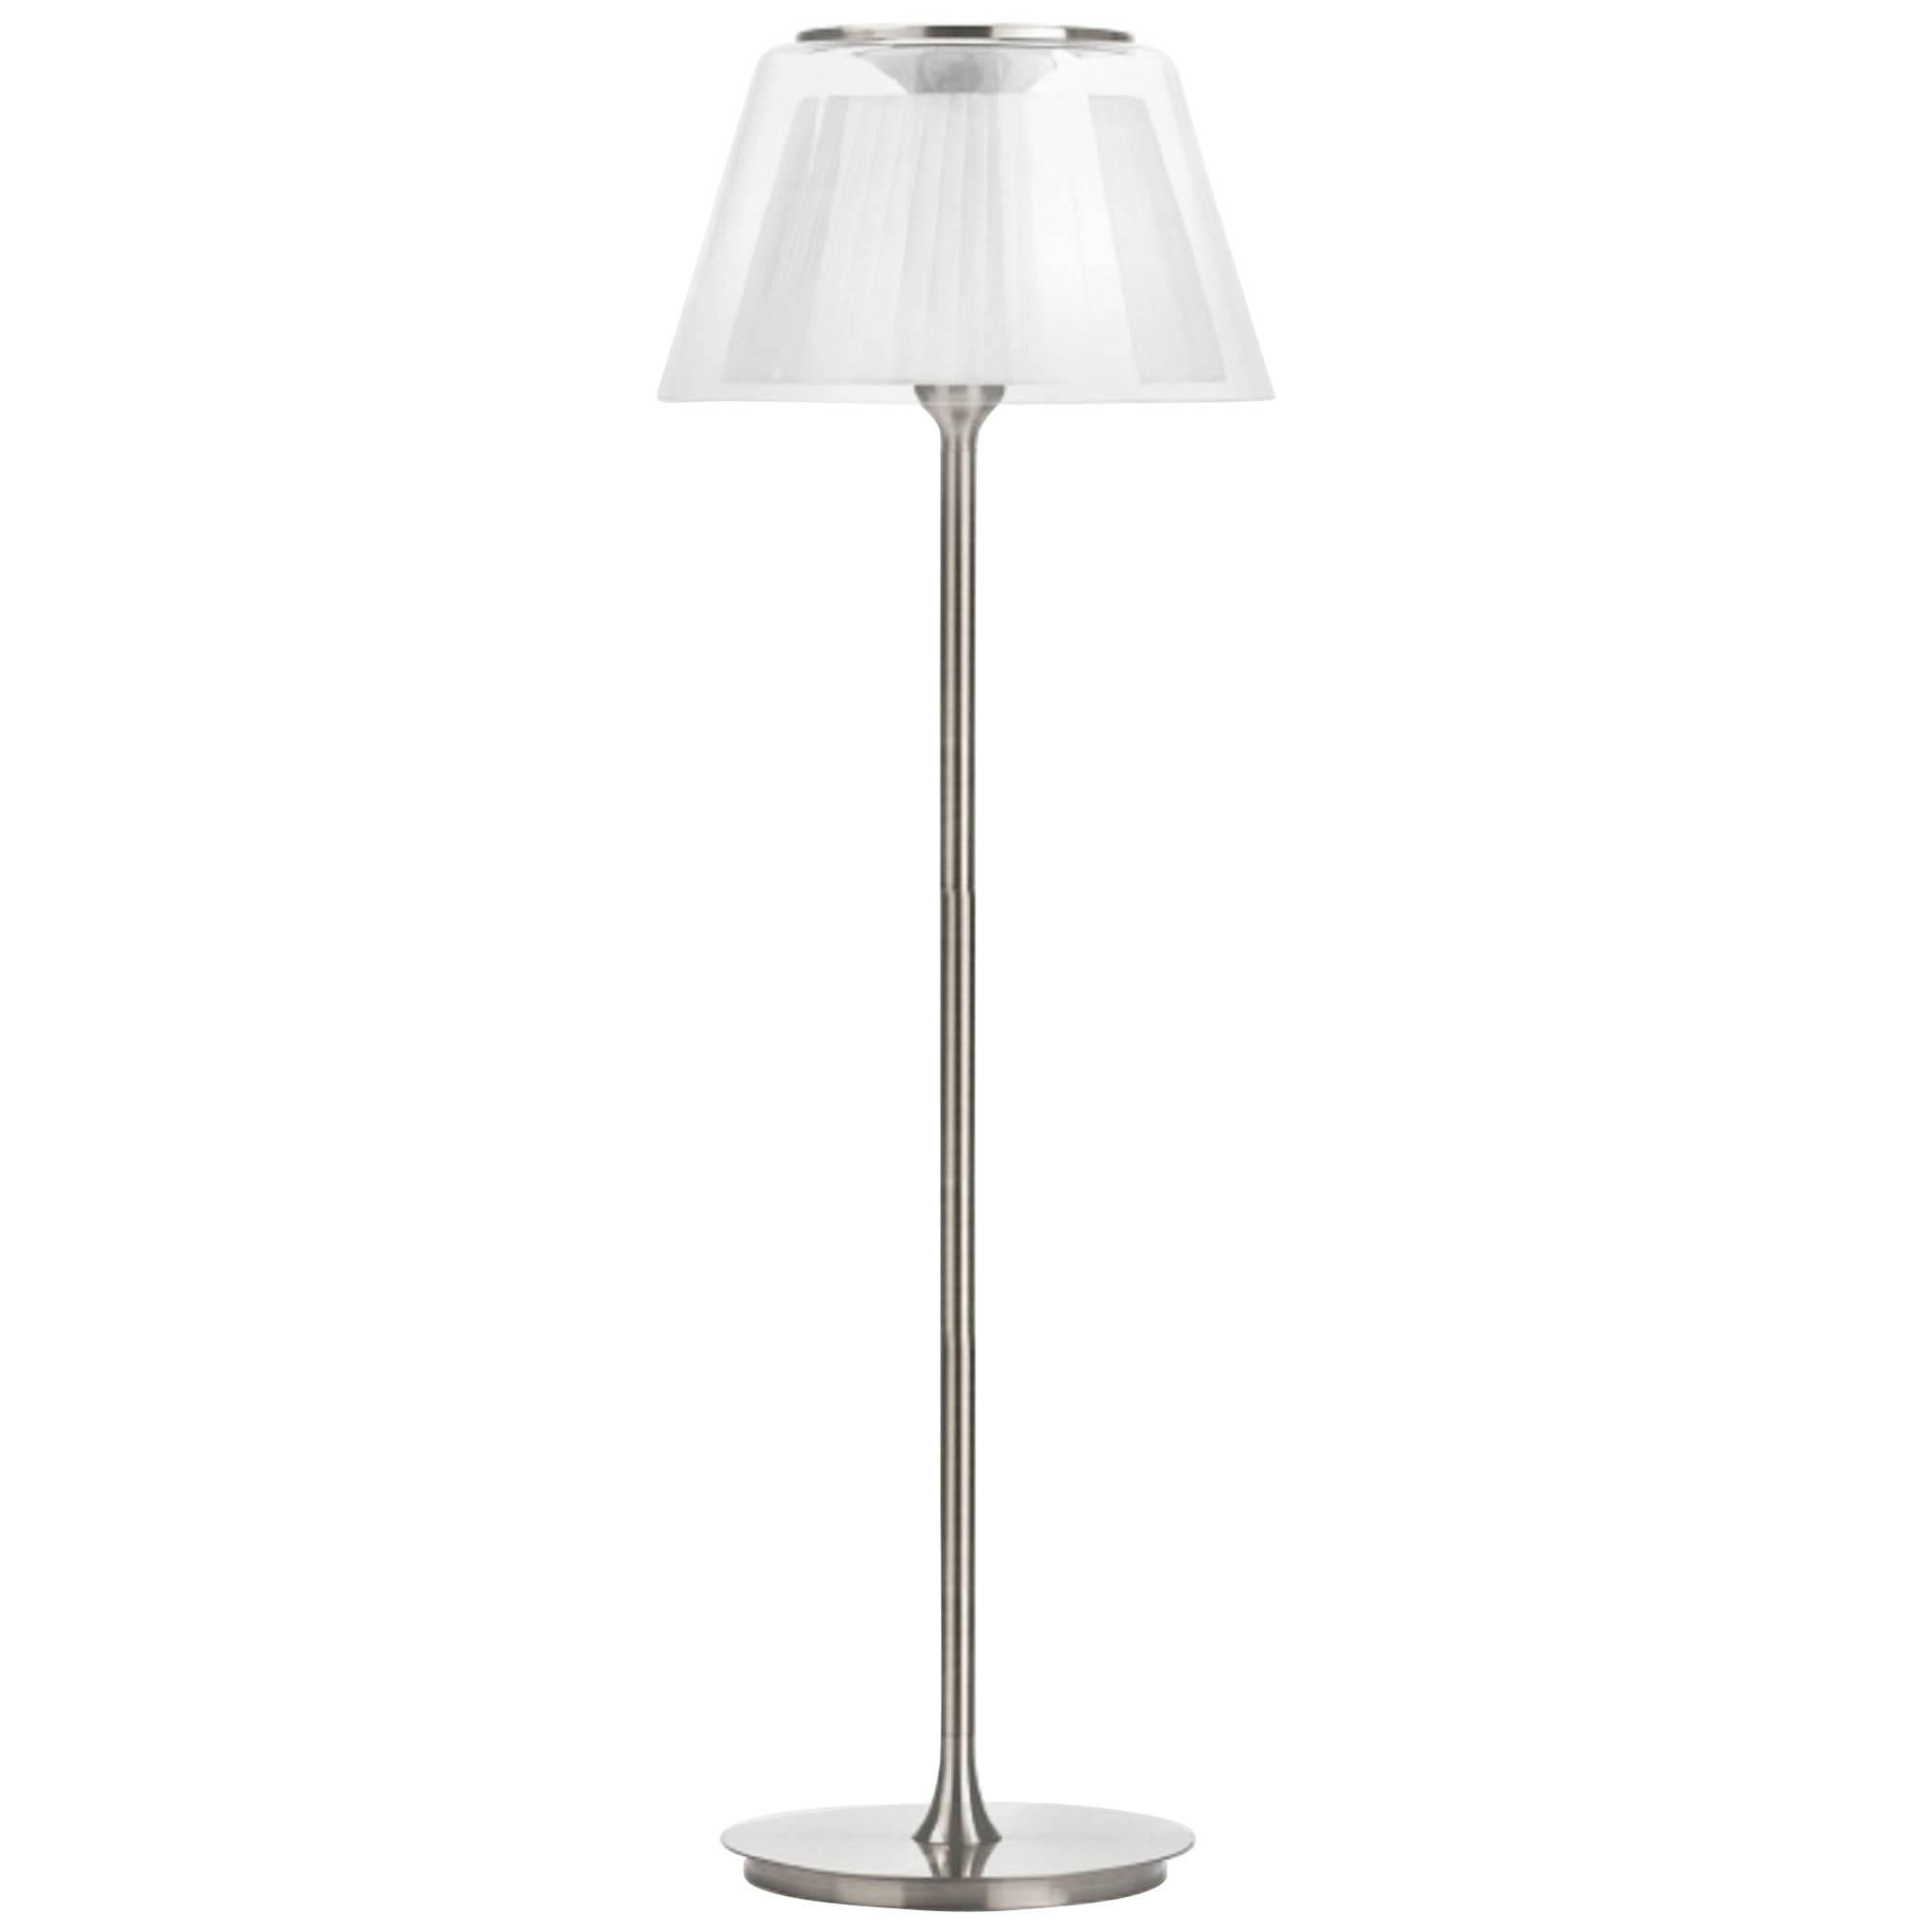 These elegant Gretta 50 floor lamps by Alfonso Fontal for Modiss feature a white fabric shade covered by handblown glass. The bases are brushed aluminium. A great look, and your shades will be preserved for all time. Made in Spain.

They have never